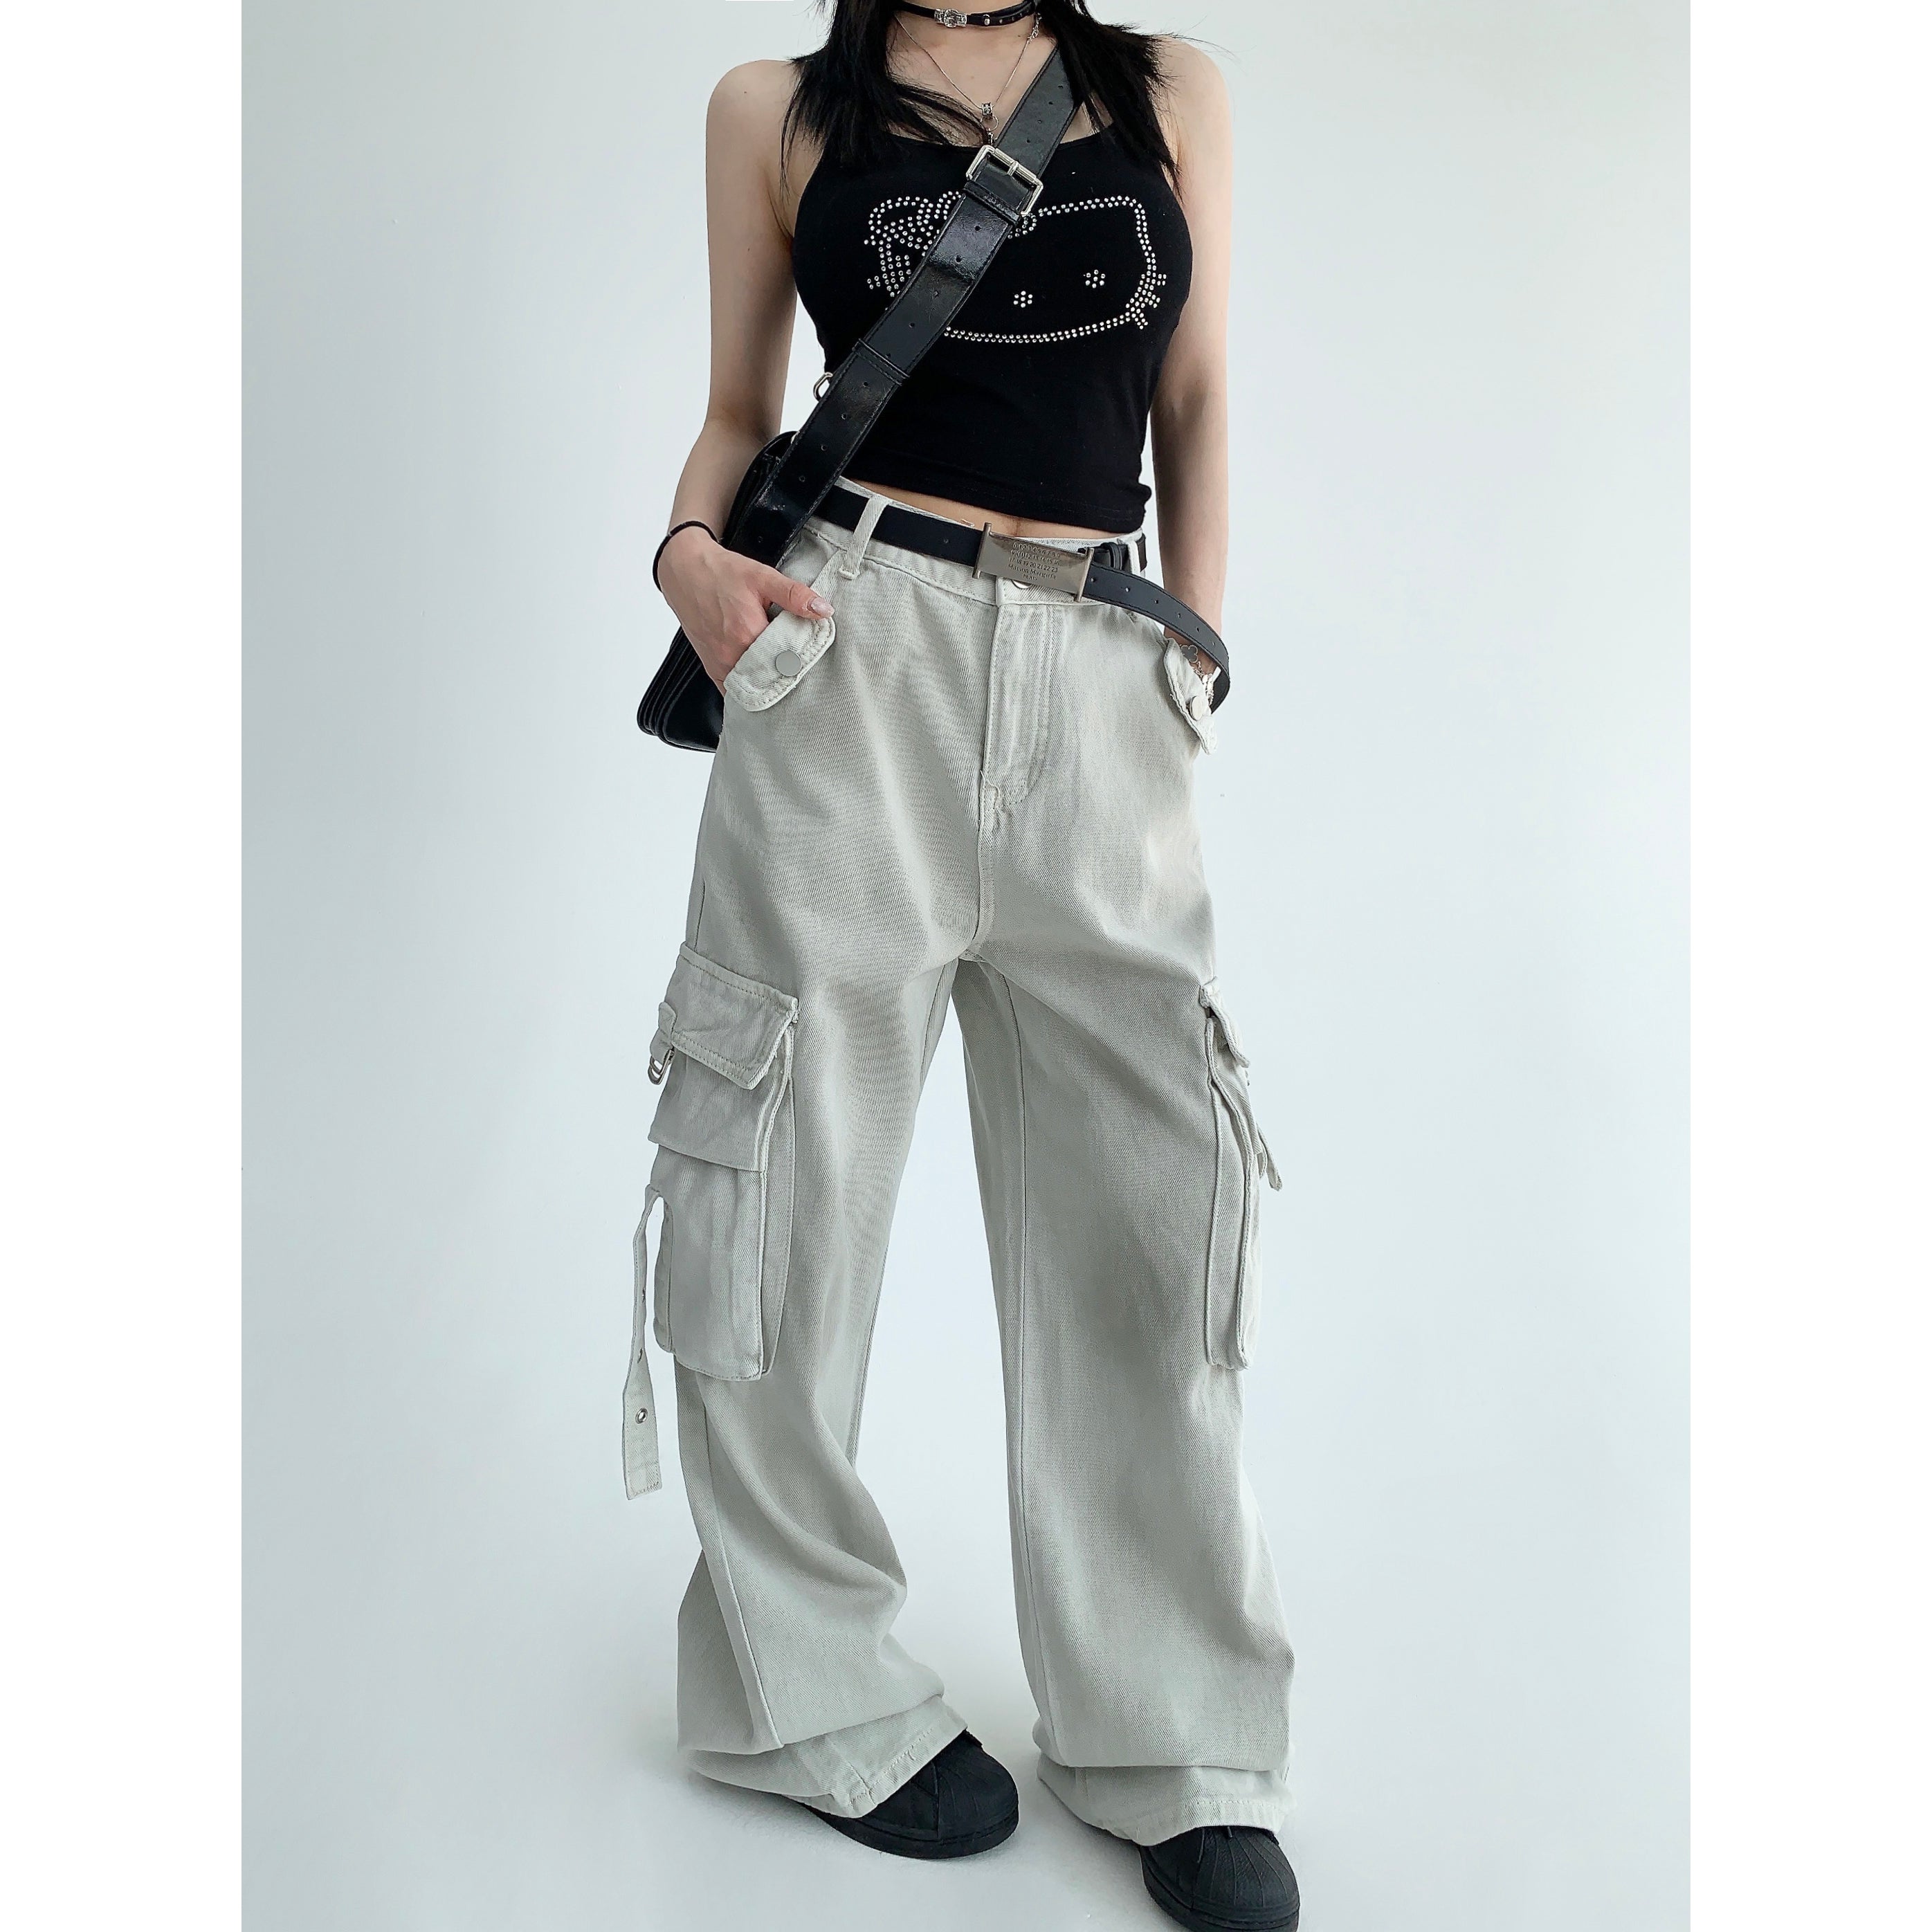 Washed & Distressed Work Cargo Pants MW9053